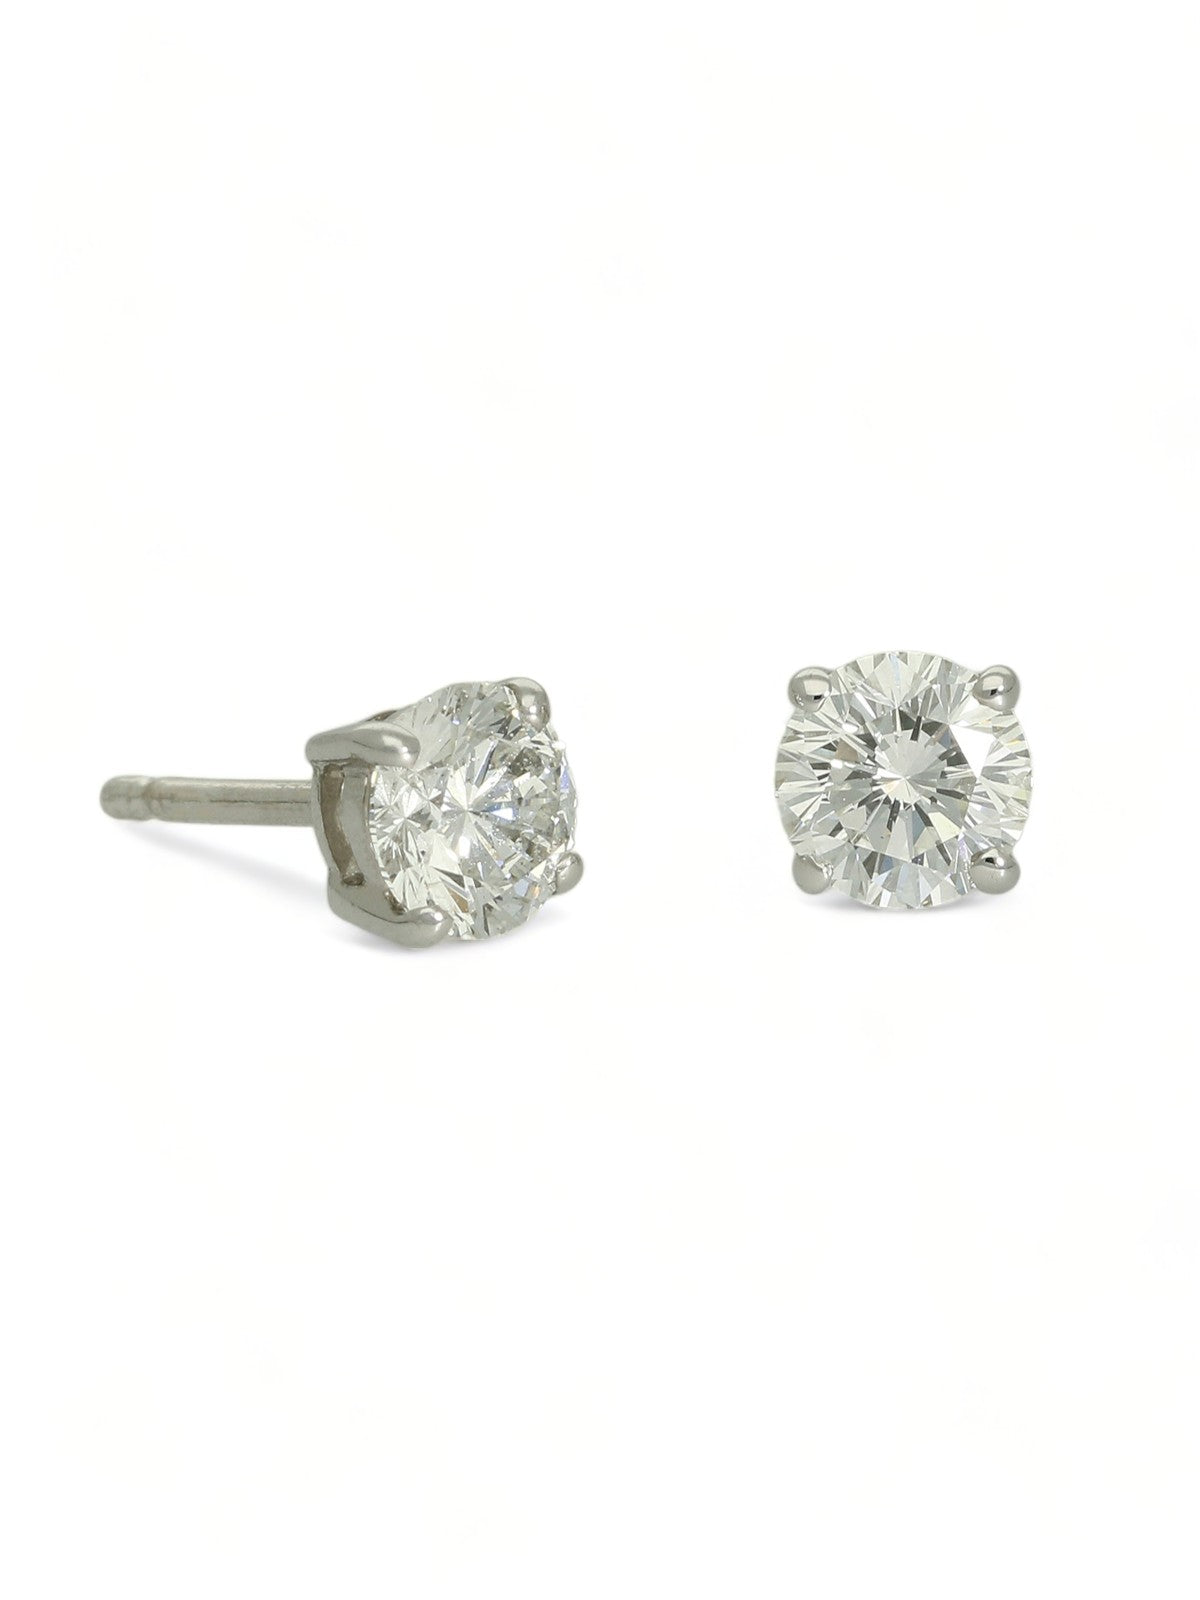 Diamond Solitaire Stud Earrings "The Catherine Collection" 1.20ct Round Brilliant Cut in 18ct White Gold